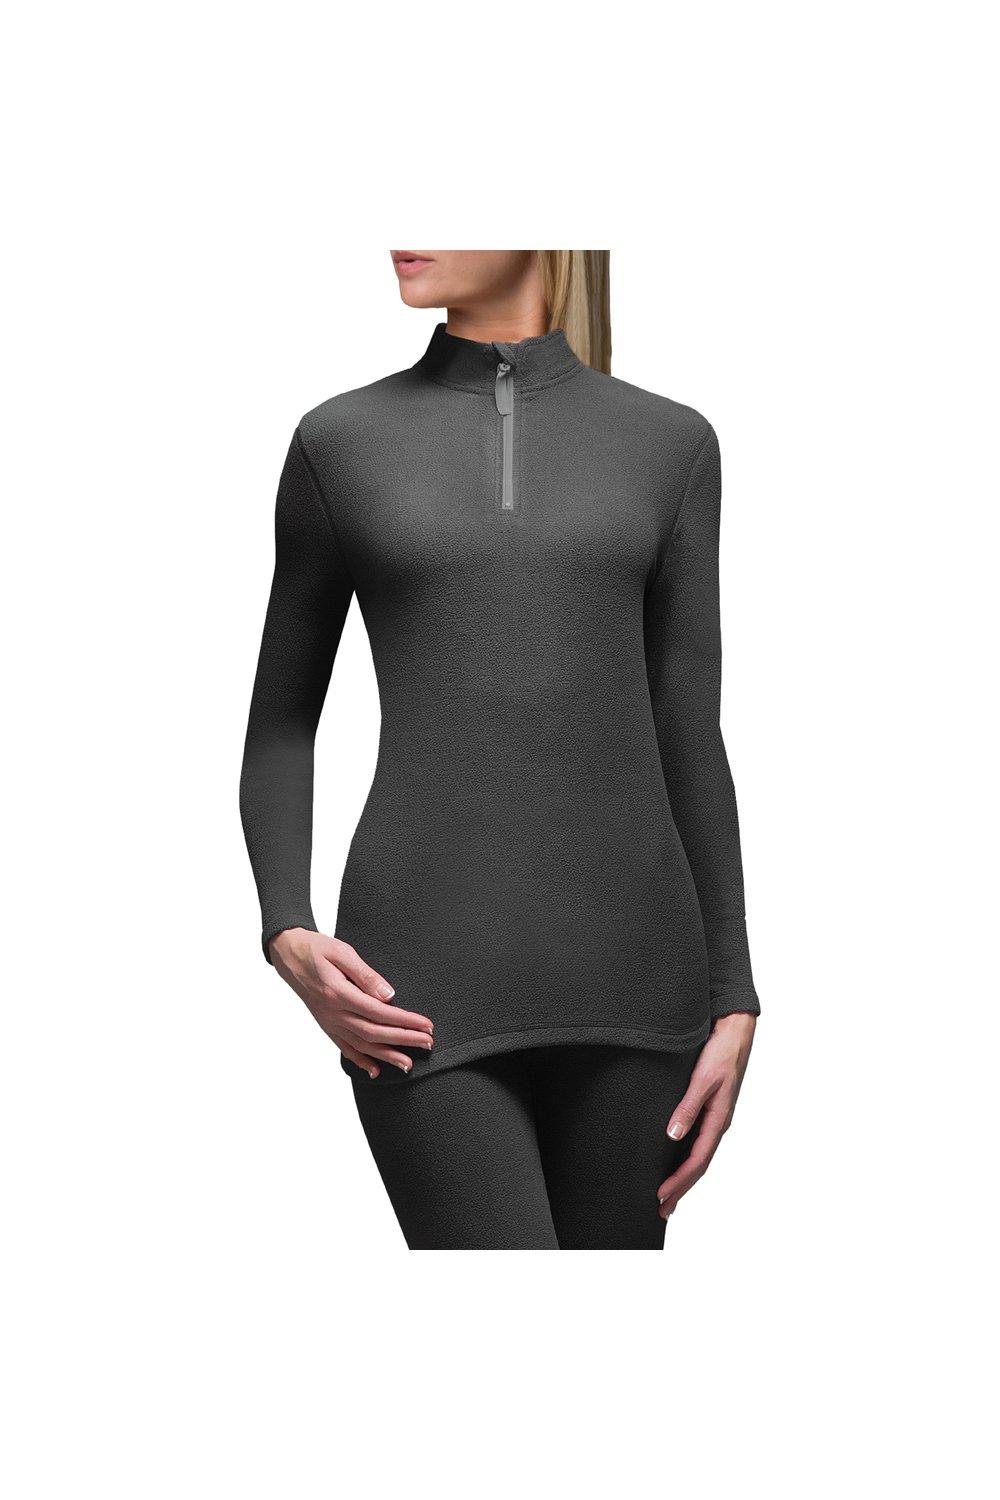 1 Pack Microfleece Base Layer Long Sleeved Top